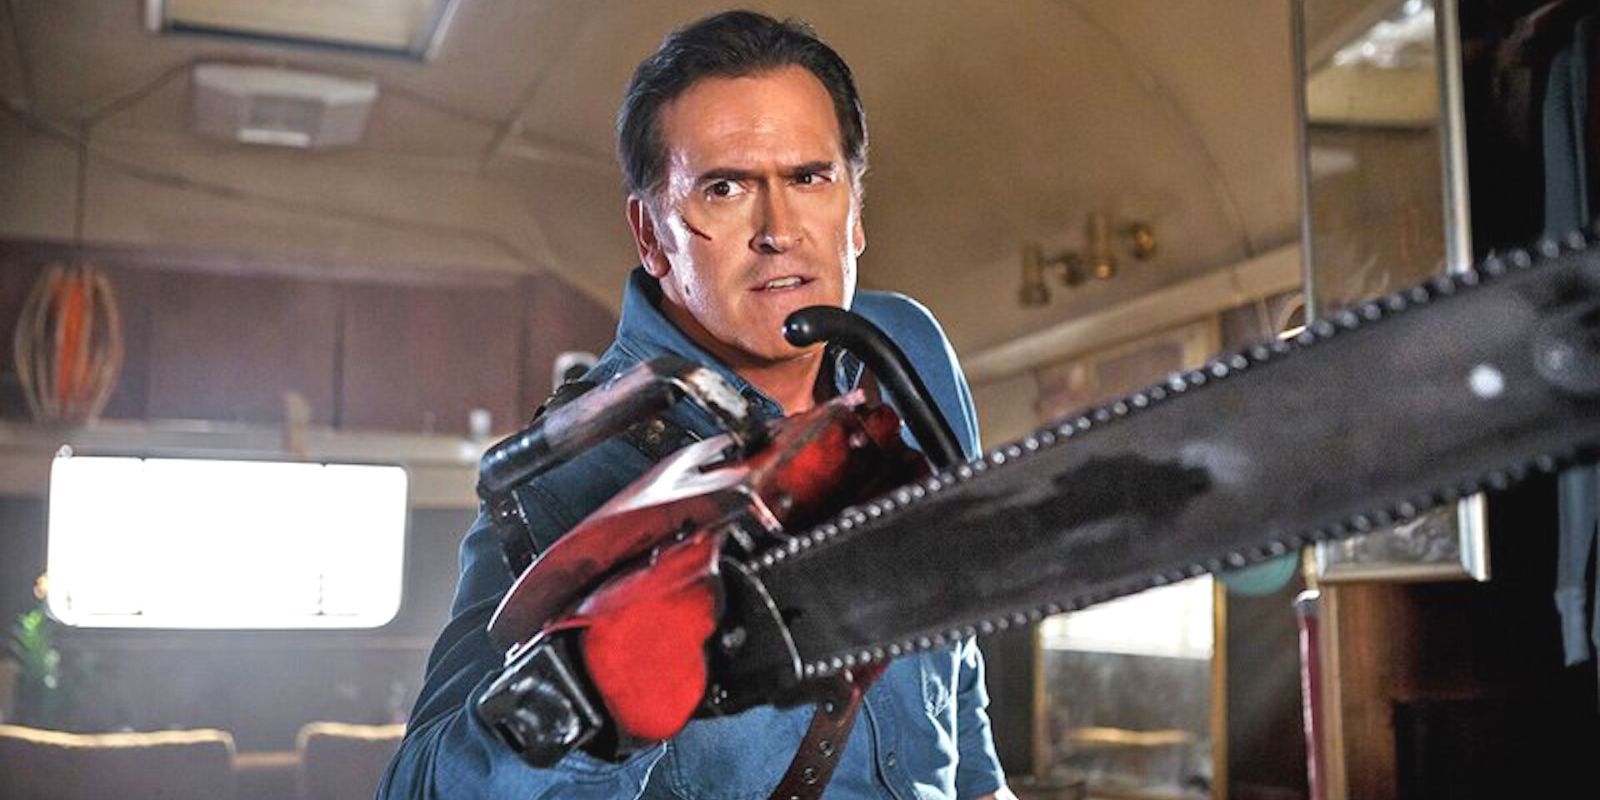 Bruce Campbell in Ash vs. the Evil Dead displaying his chainsaw arm